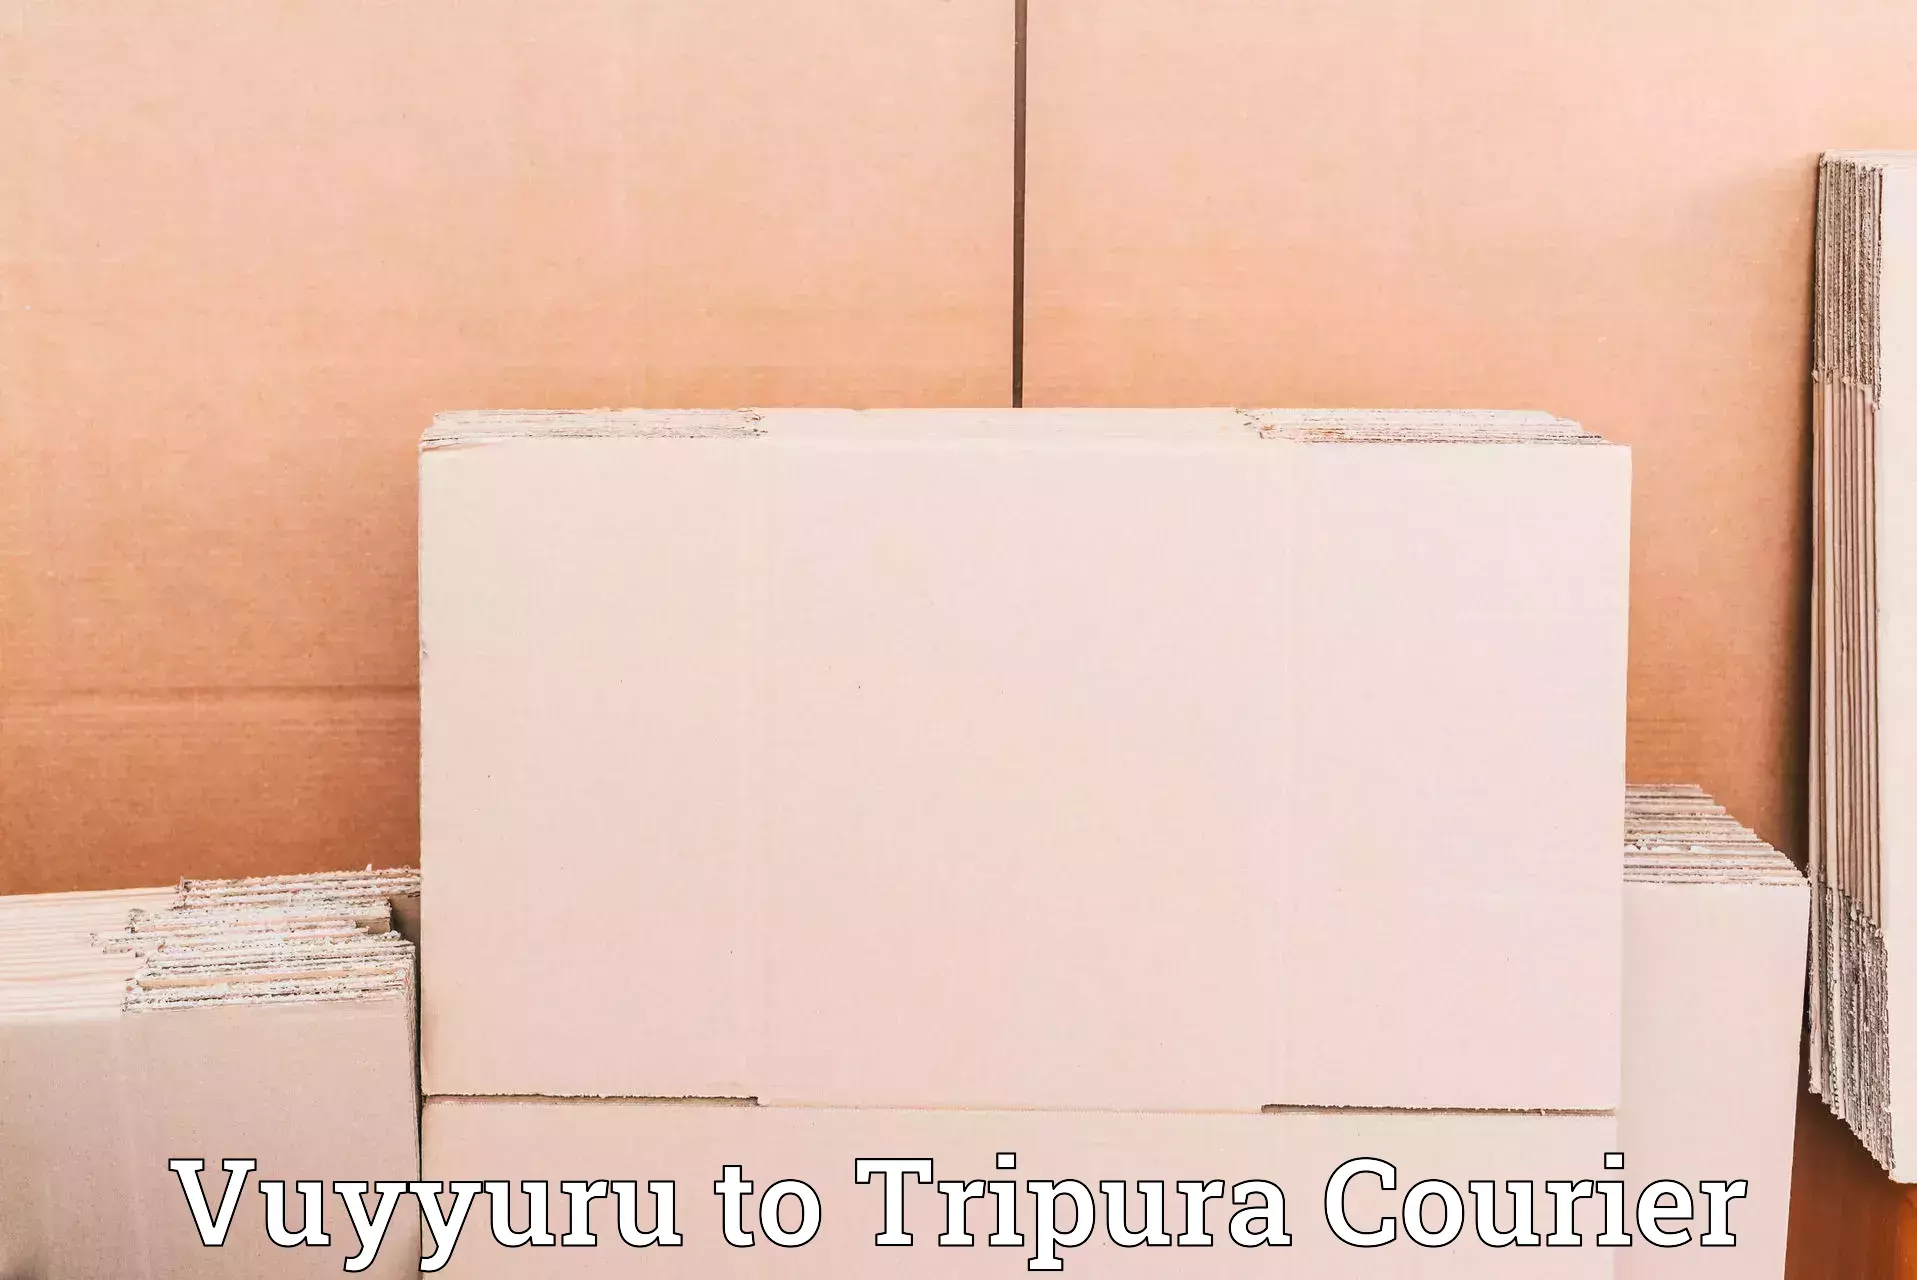 State-of-the-art courier technology Vuyyuru to Amarpur